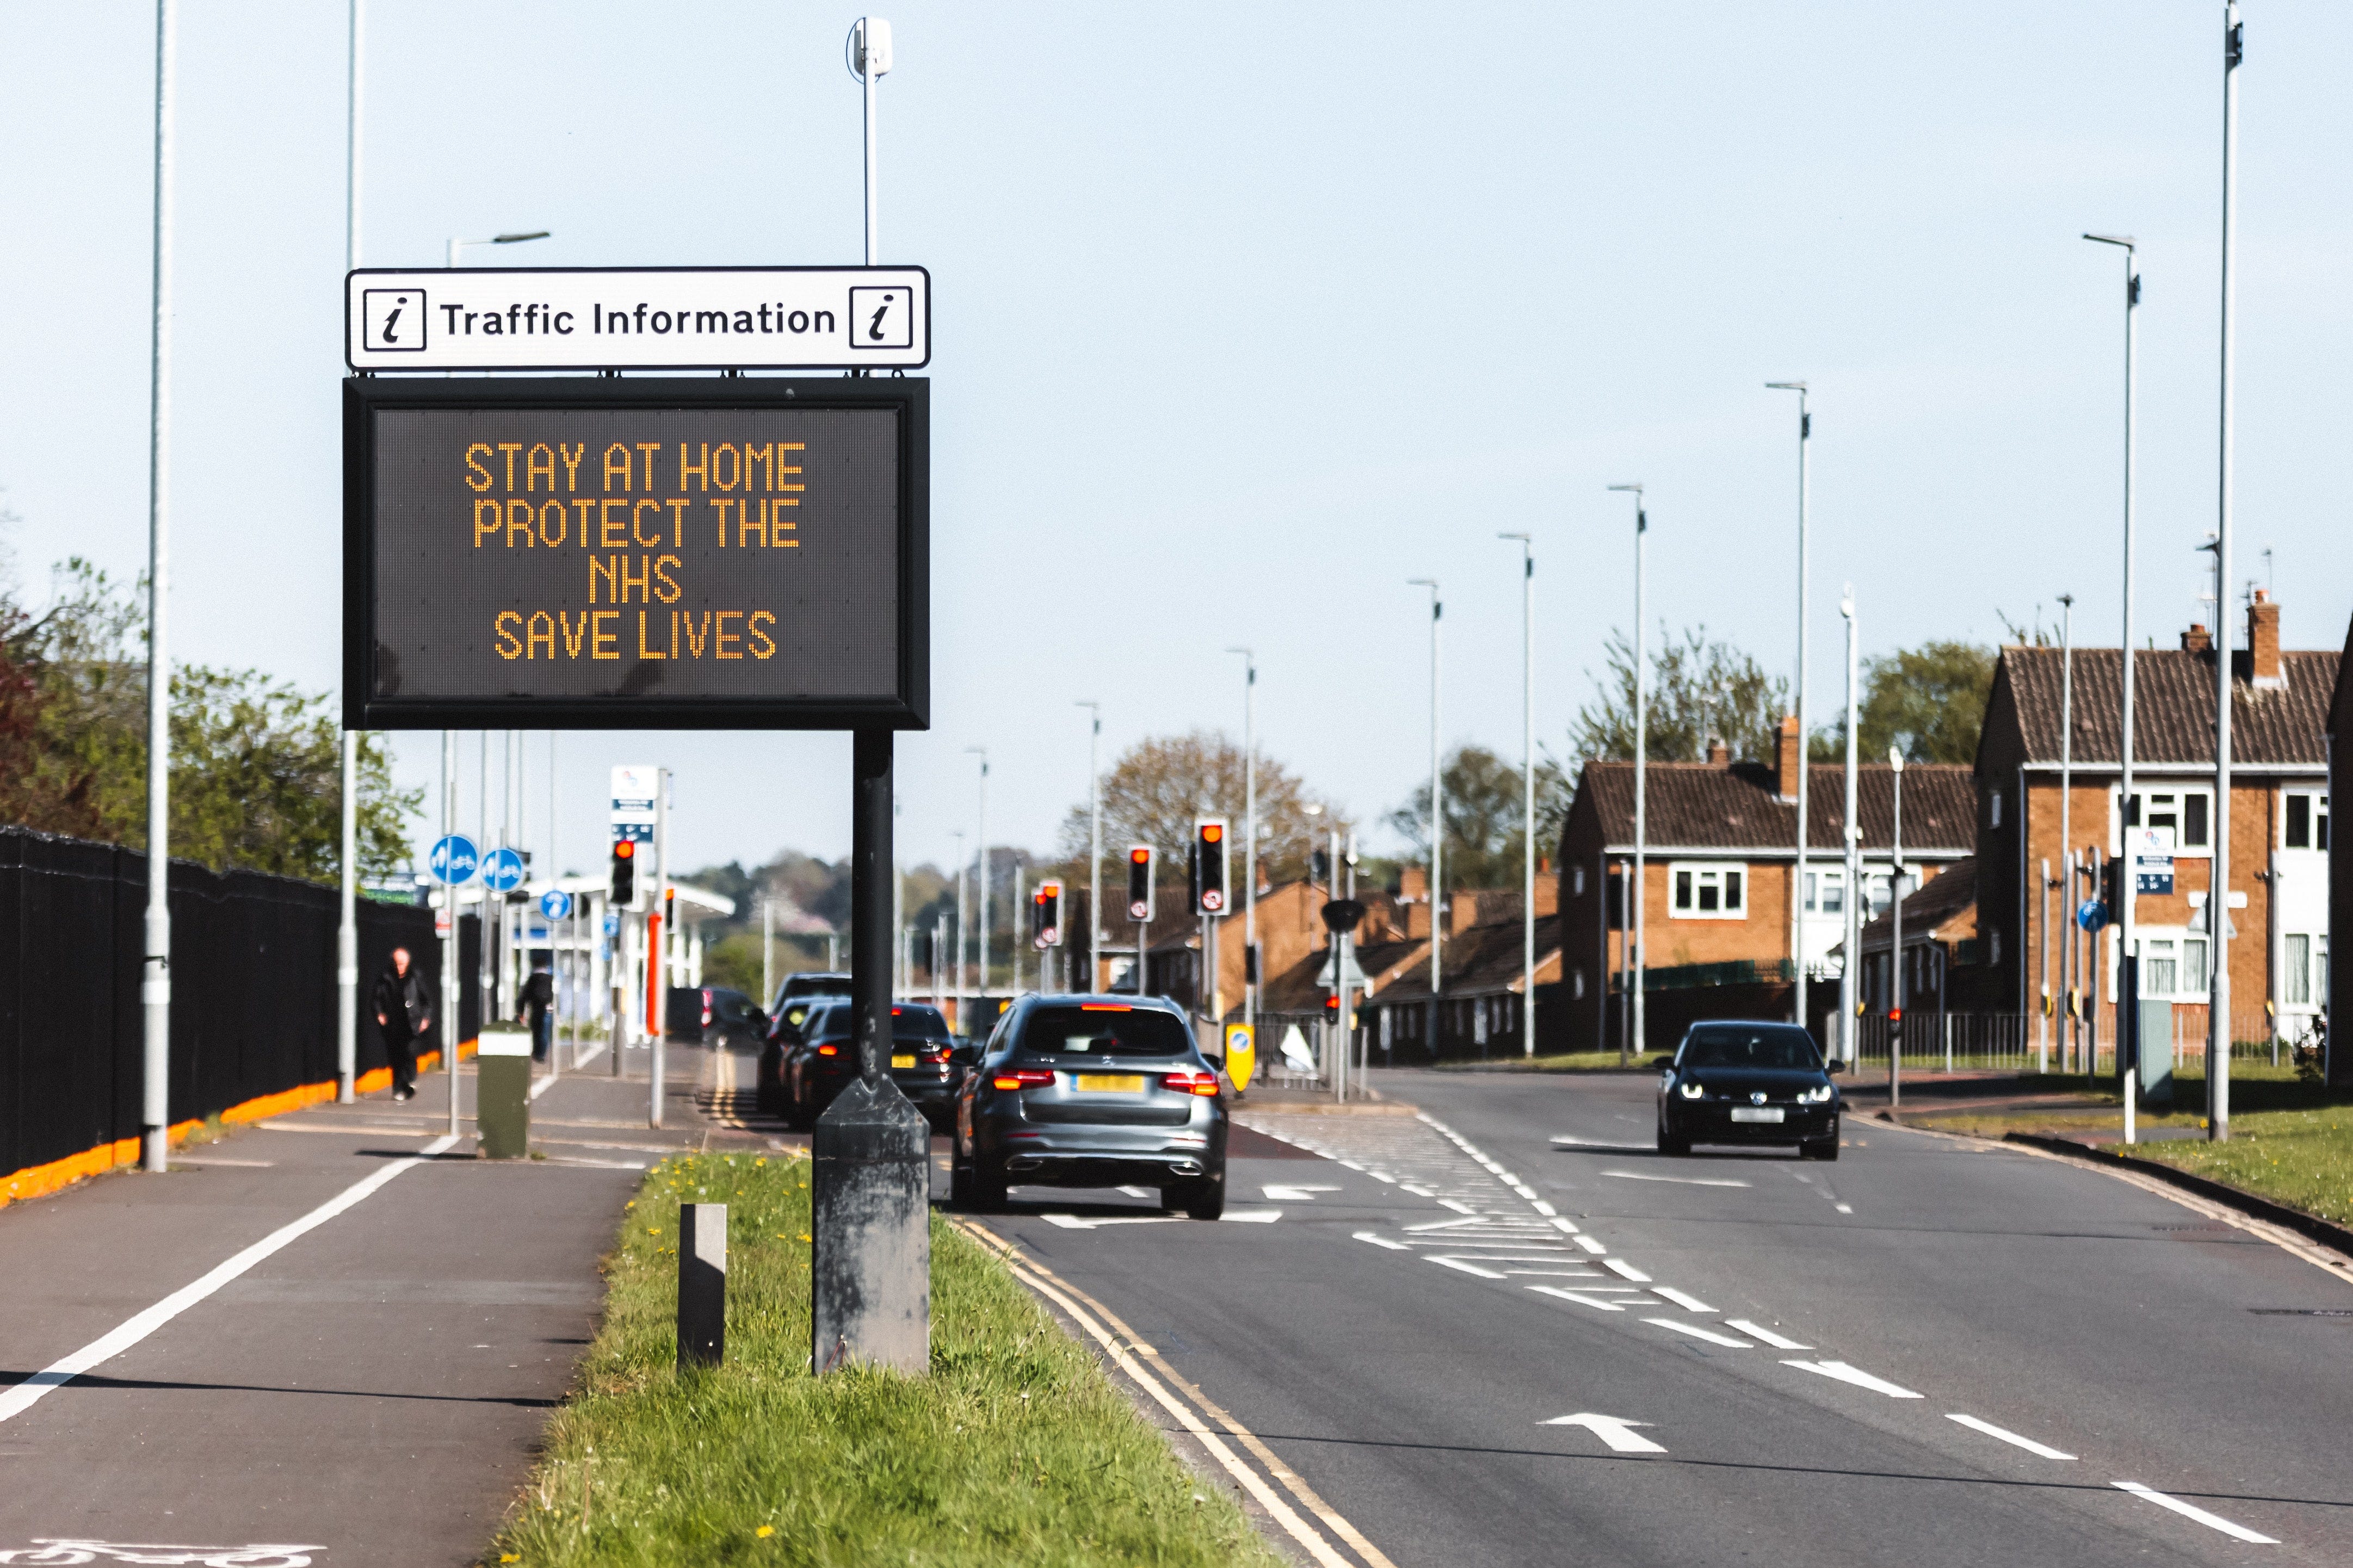 Vehicles on a road in the UK next to an electronic sign, where it reads: “Stay at Home. Protect the NHS. Save lives.”